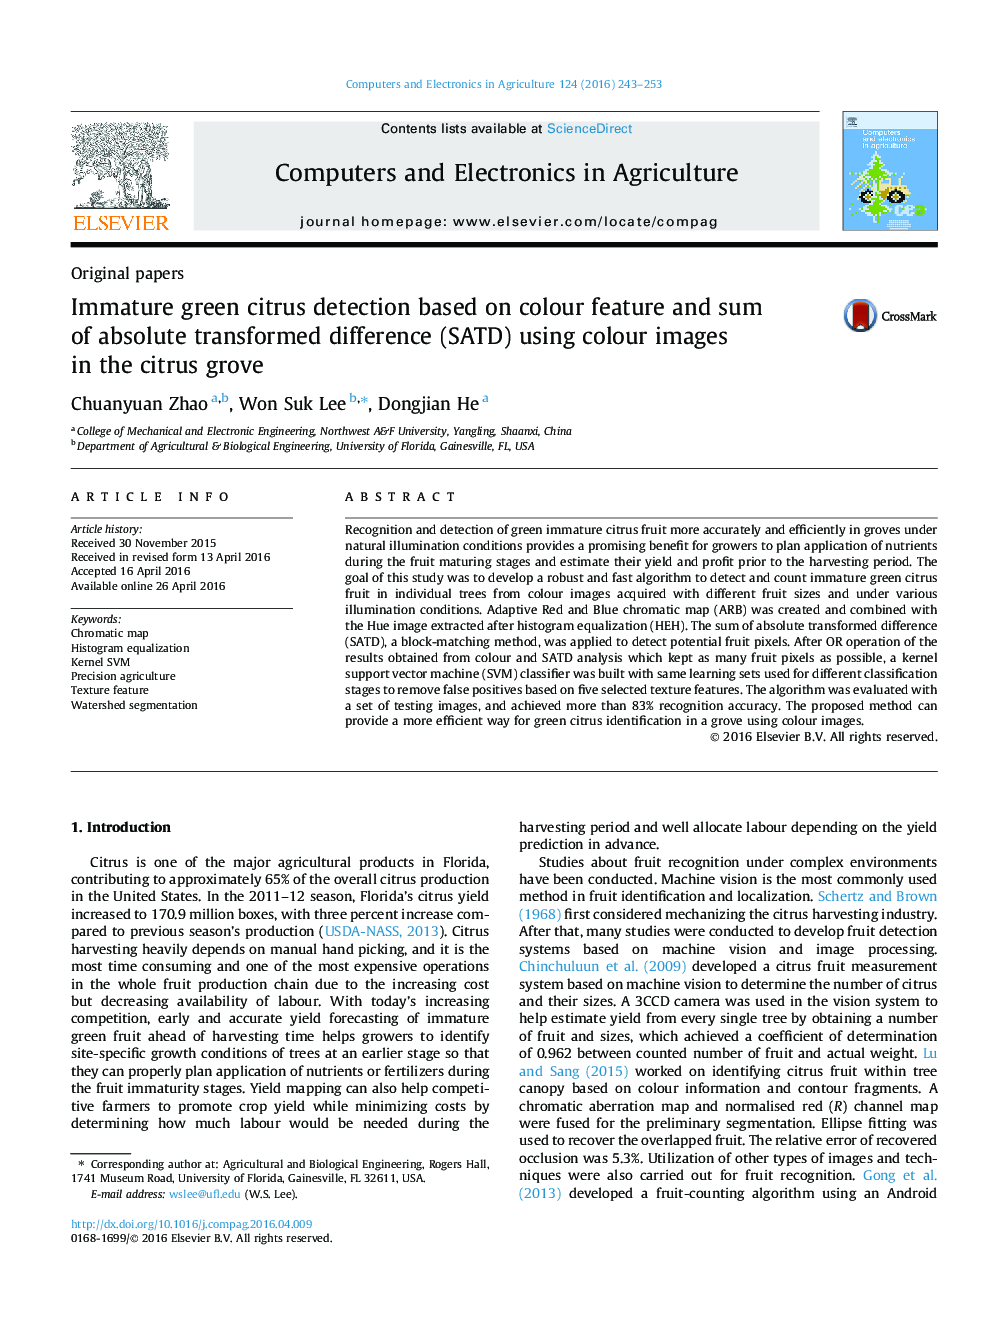 Immature green citrus detection based on colour feature and sum of absolute transformed difference (SATD) using colour images in the citrus grove